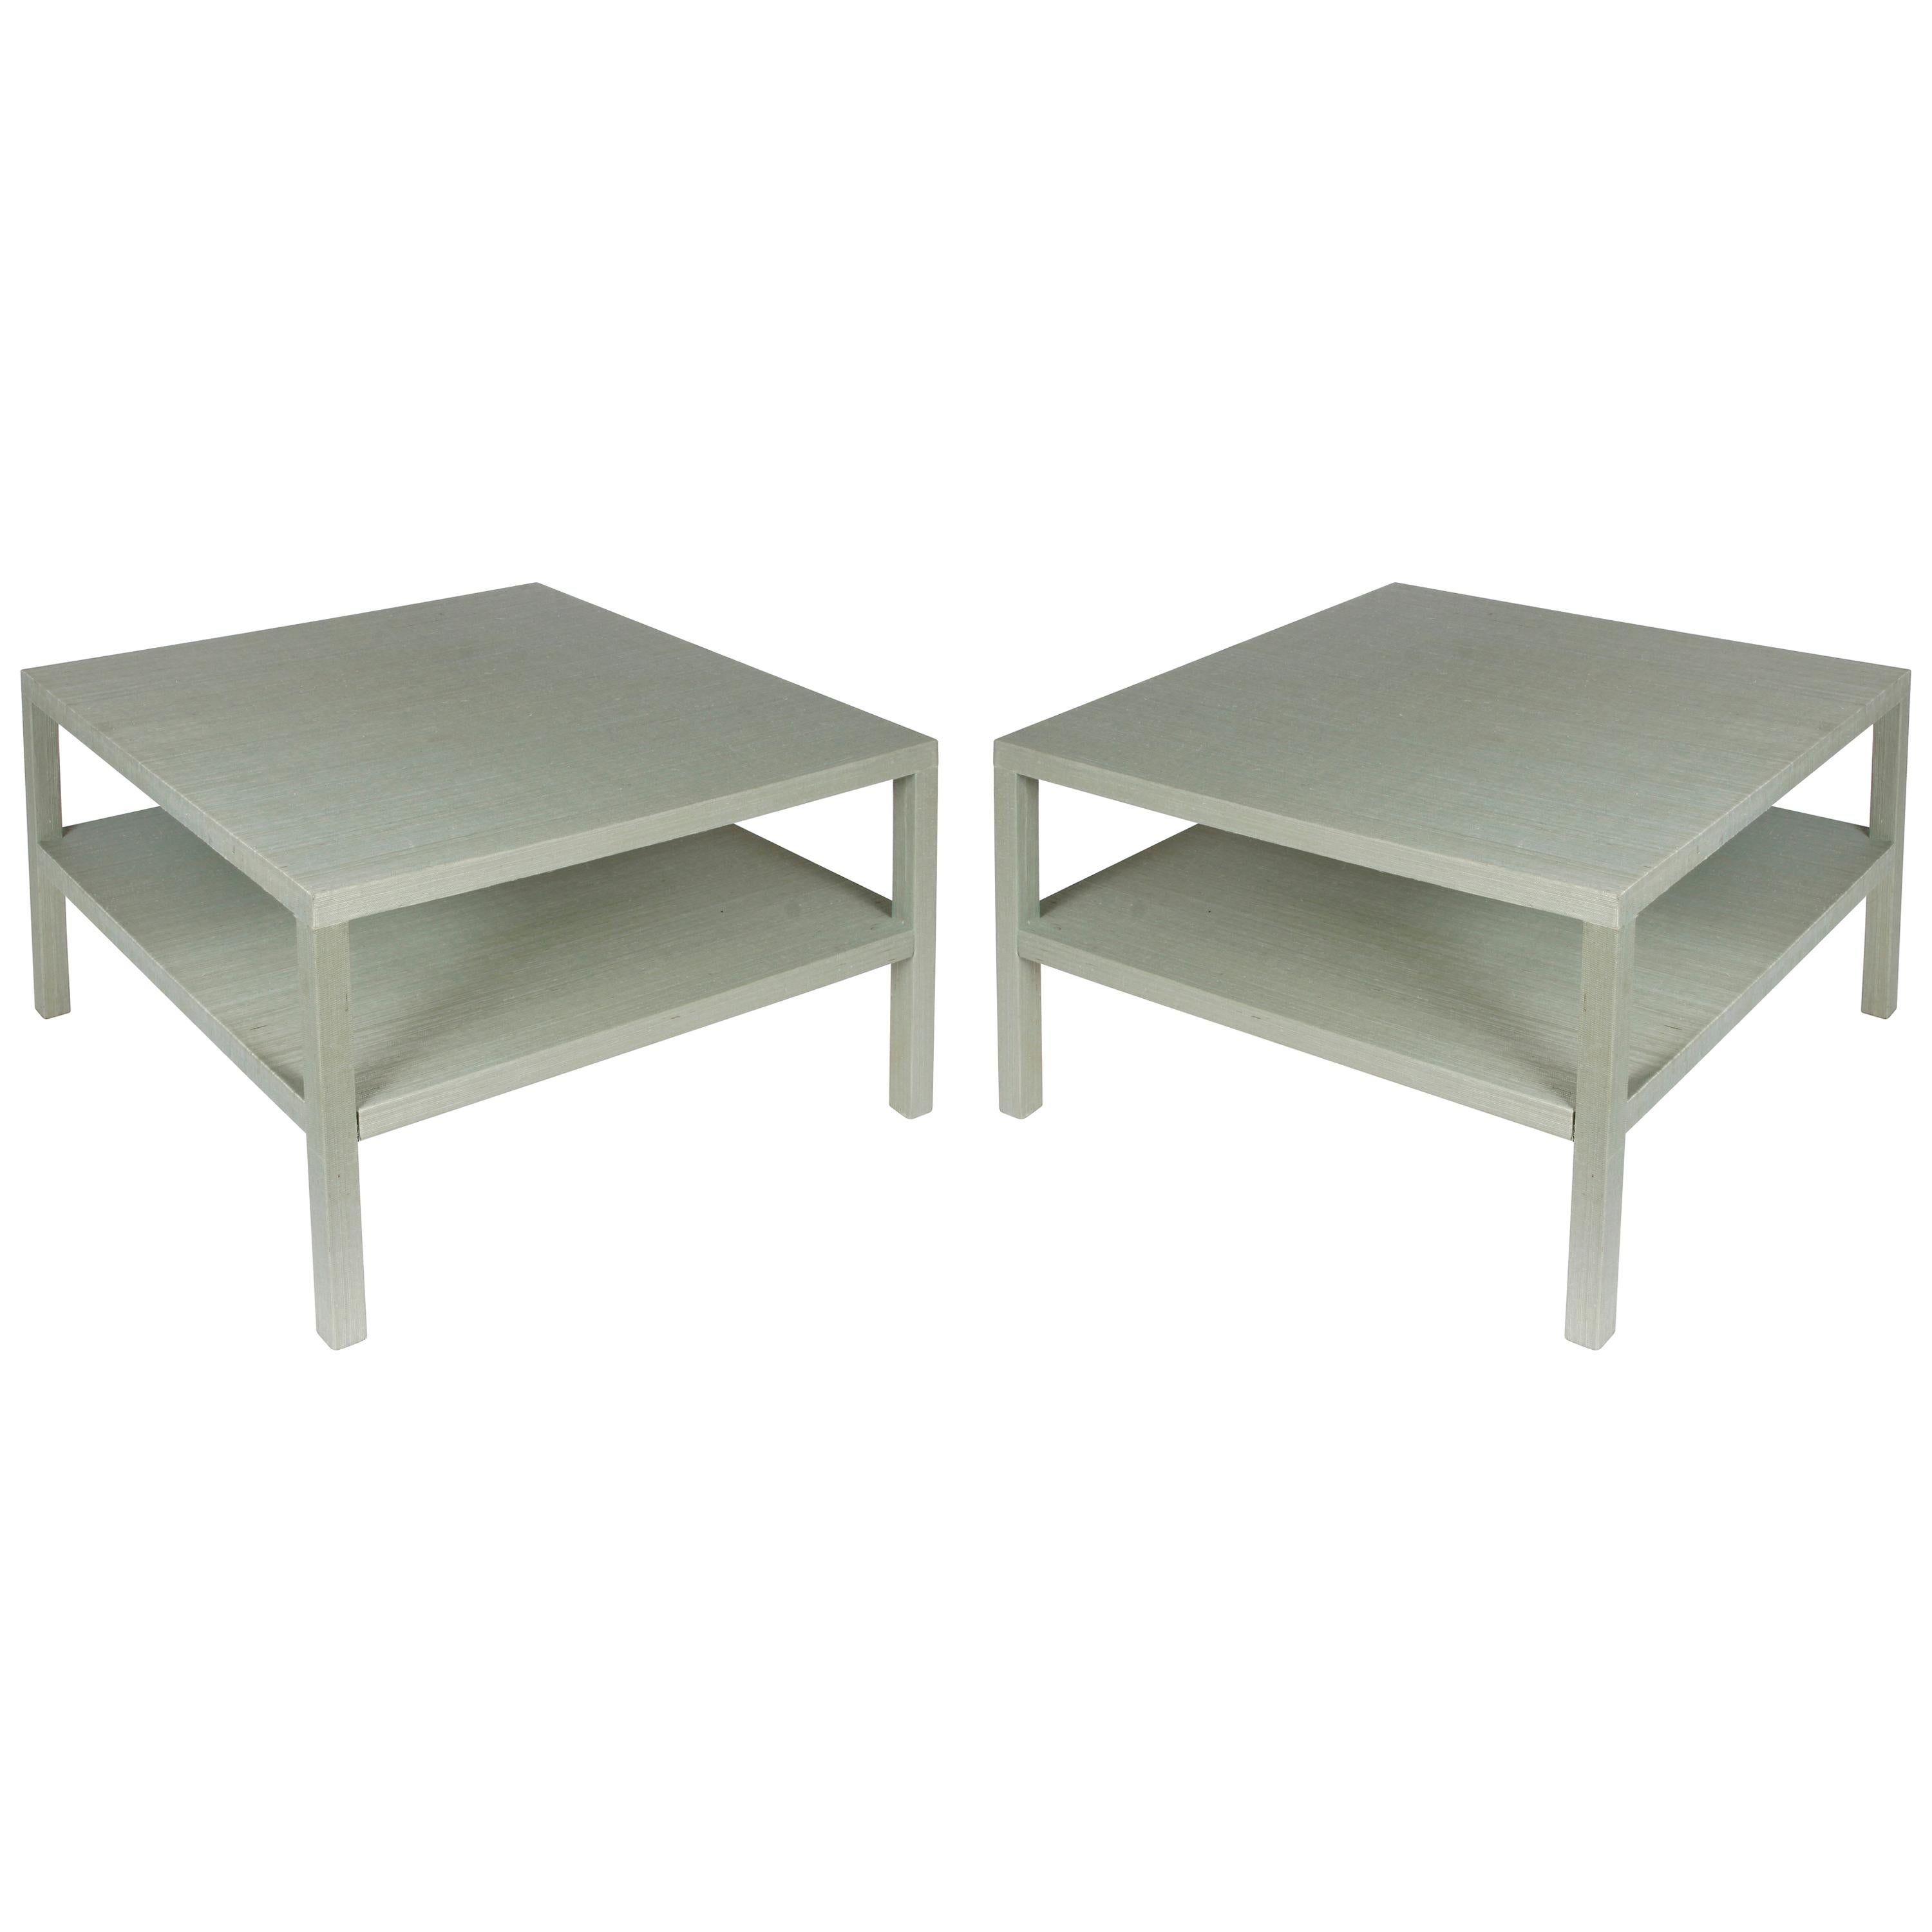 Pair of Grasscloth Two-Tiered Tables